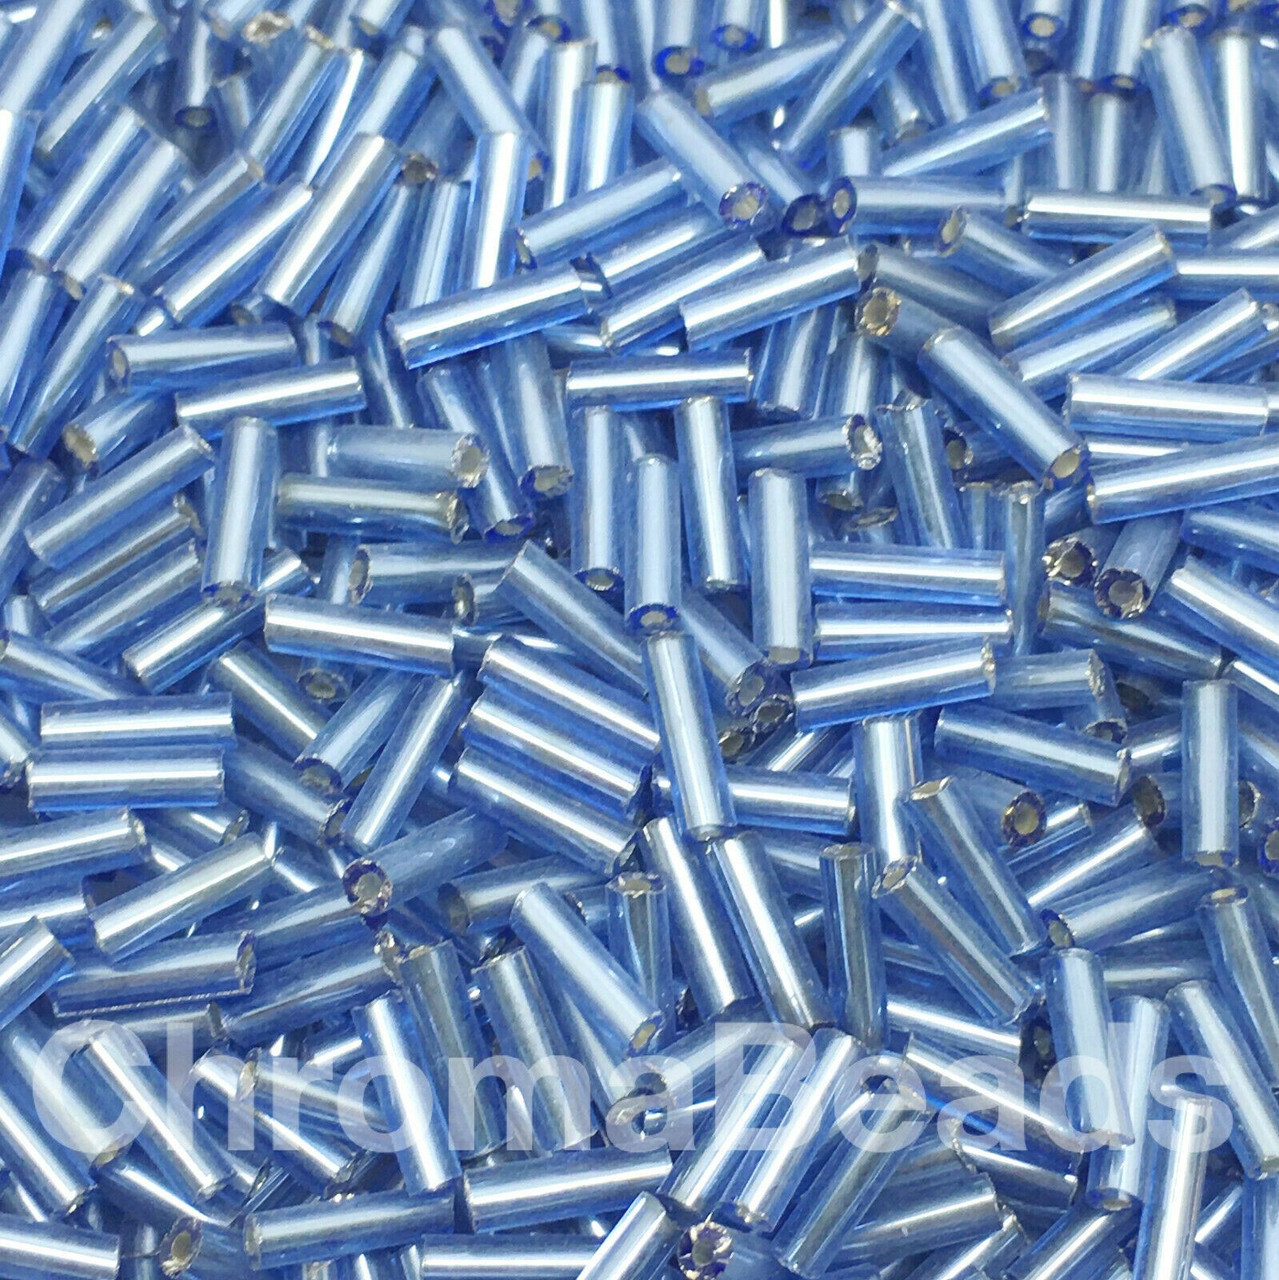 50g glass bugle beads - Light Blue Silver-Lined - approx 6mm